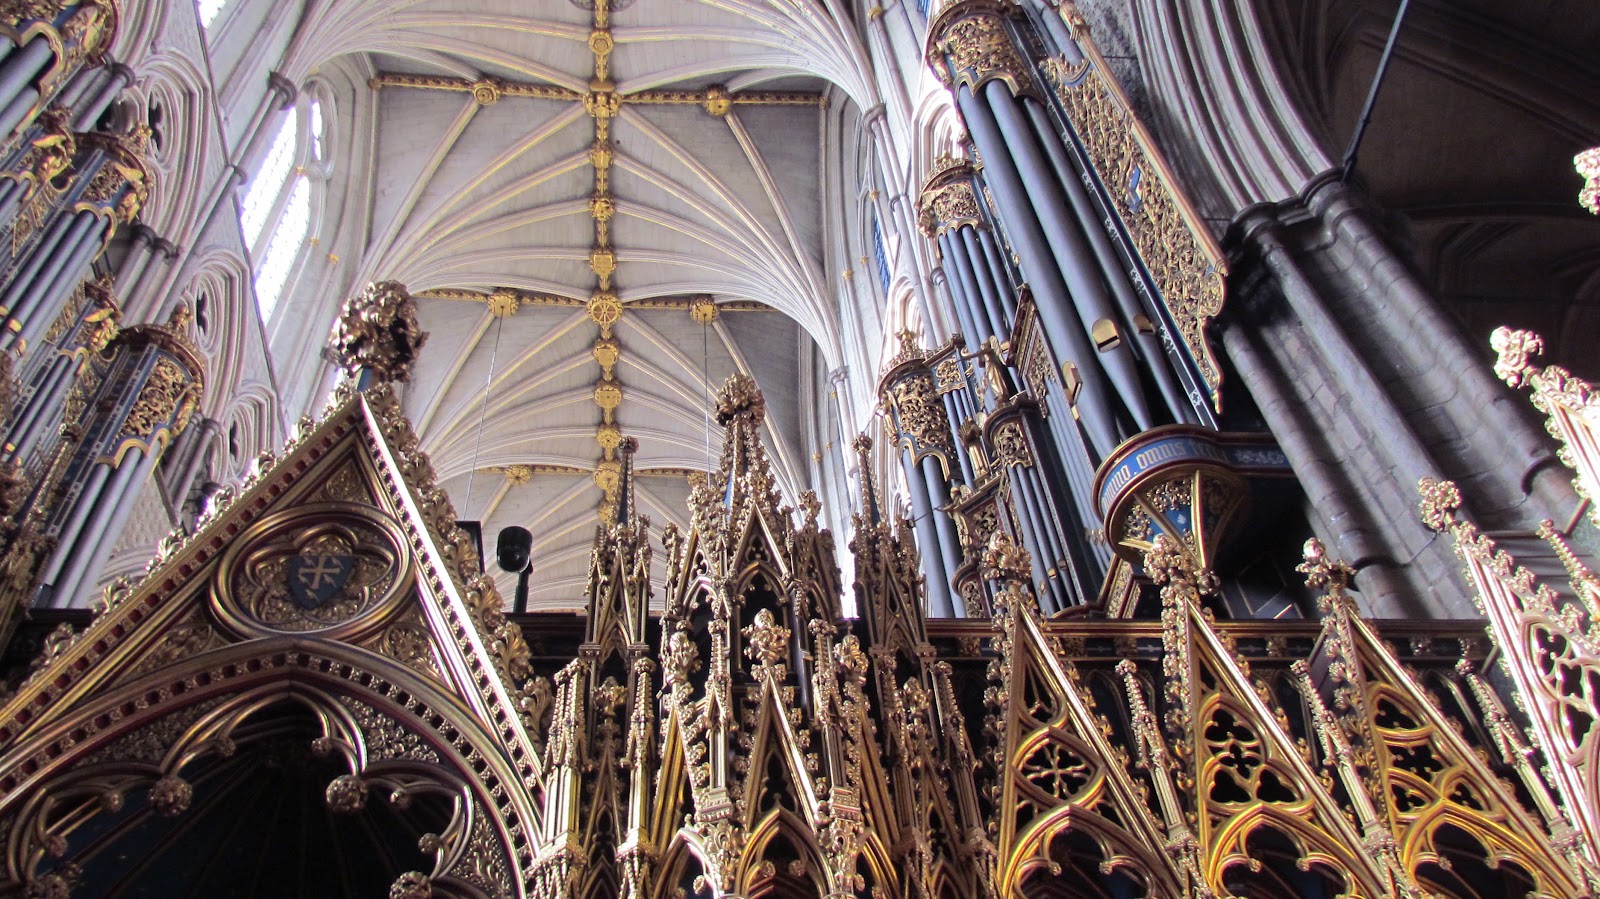 Article Foreign: Day 3 in London: Westminster Abbey